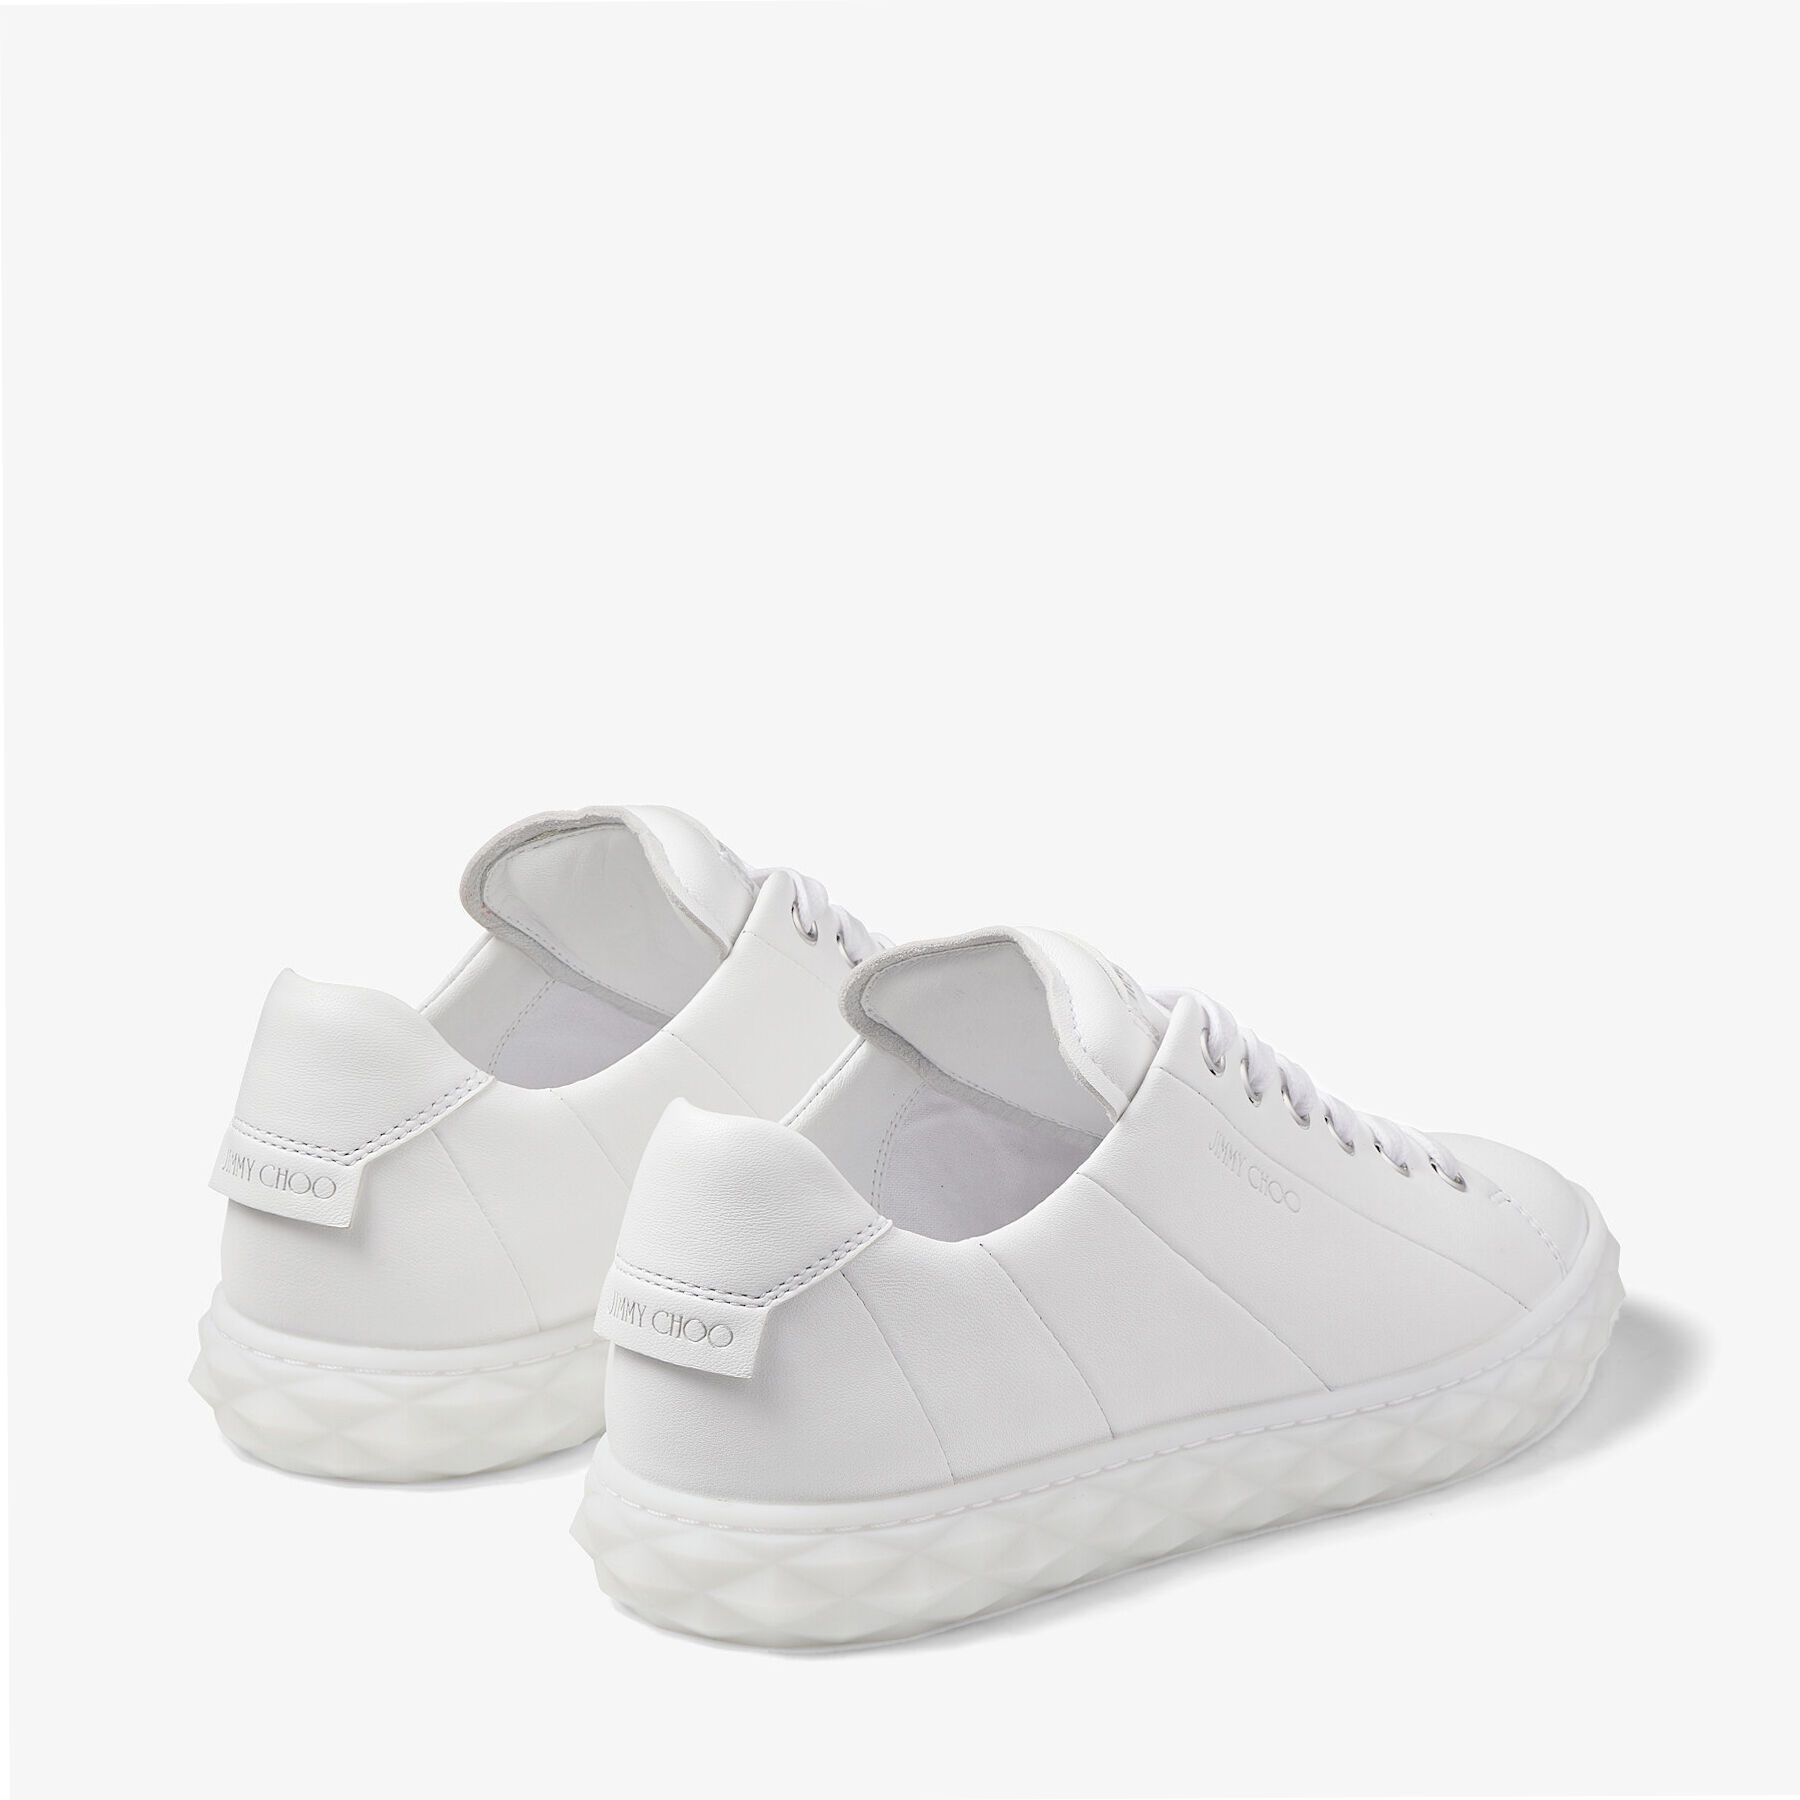 Diamond Light/F
White Nappa Leather Low-Top Trainers - 6